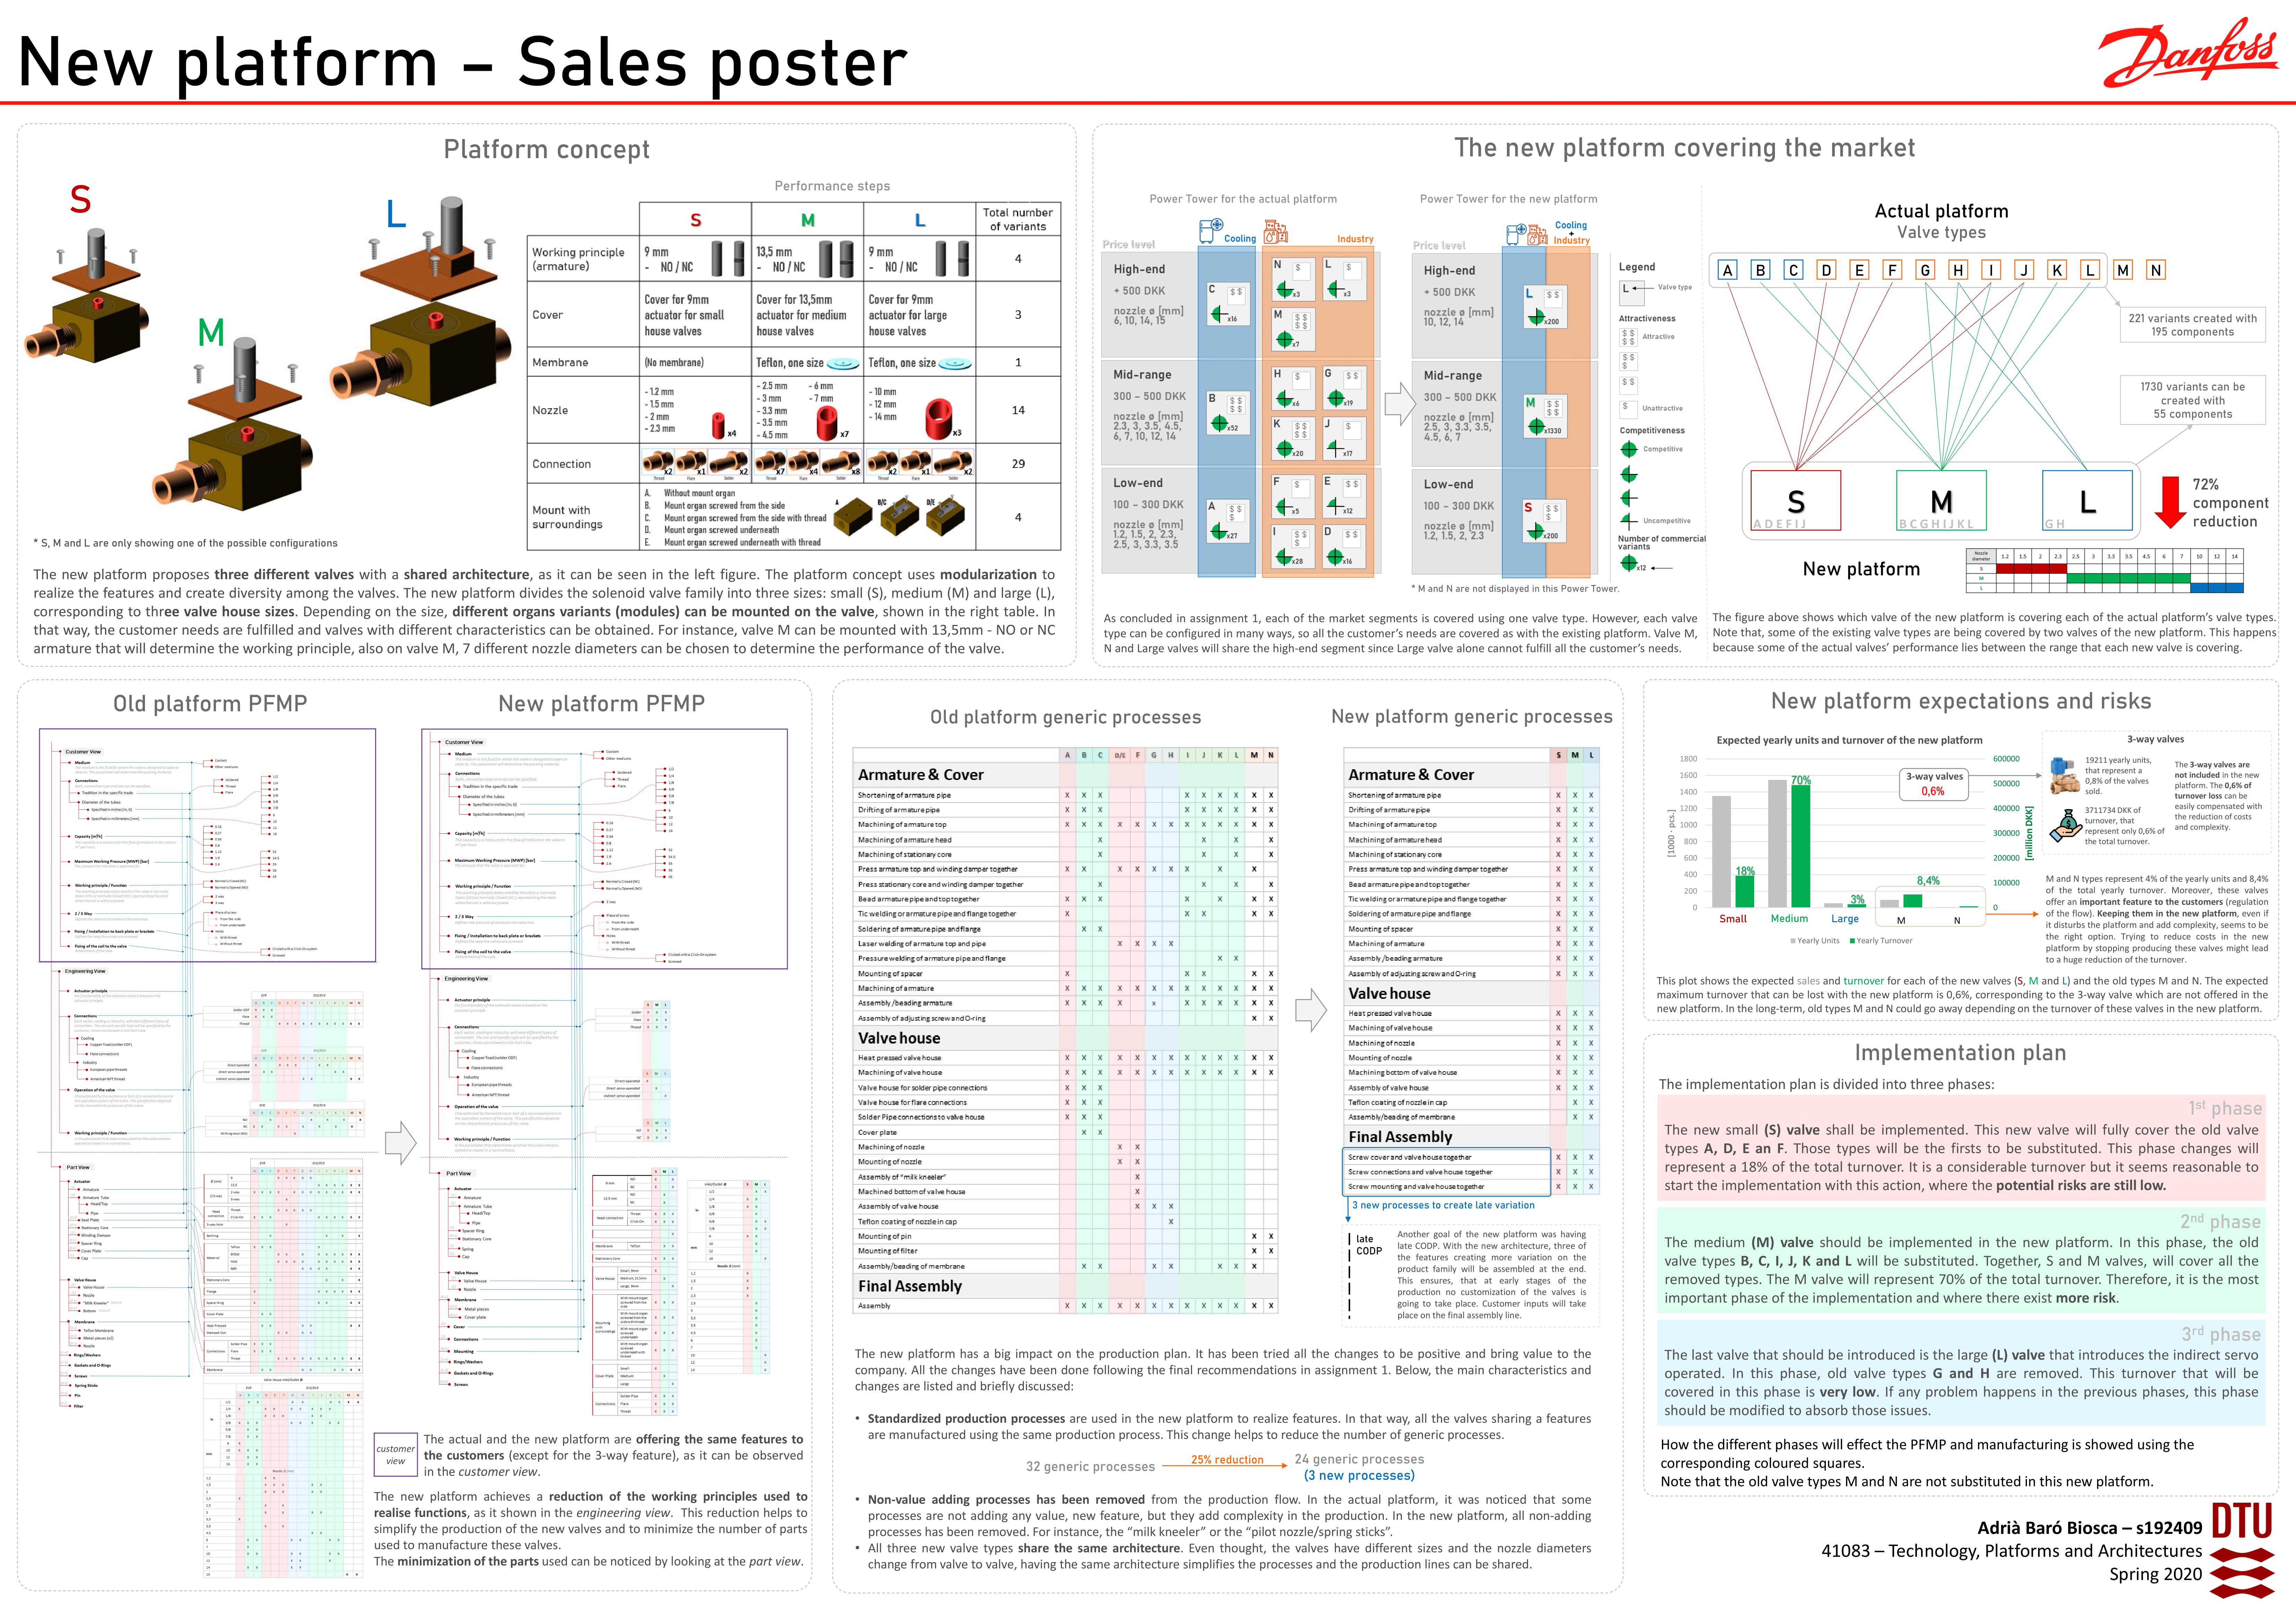 Sales poster for the new platform concept